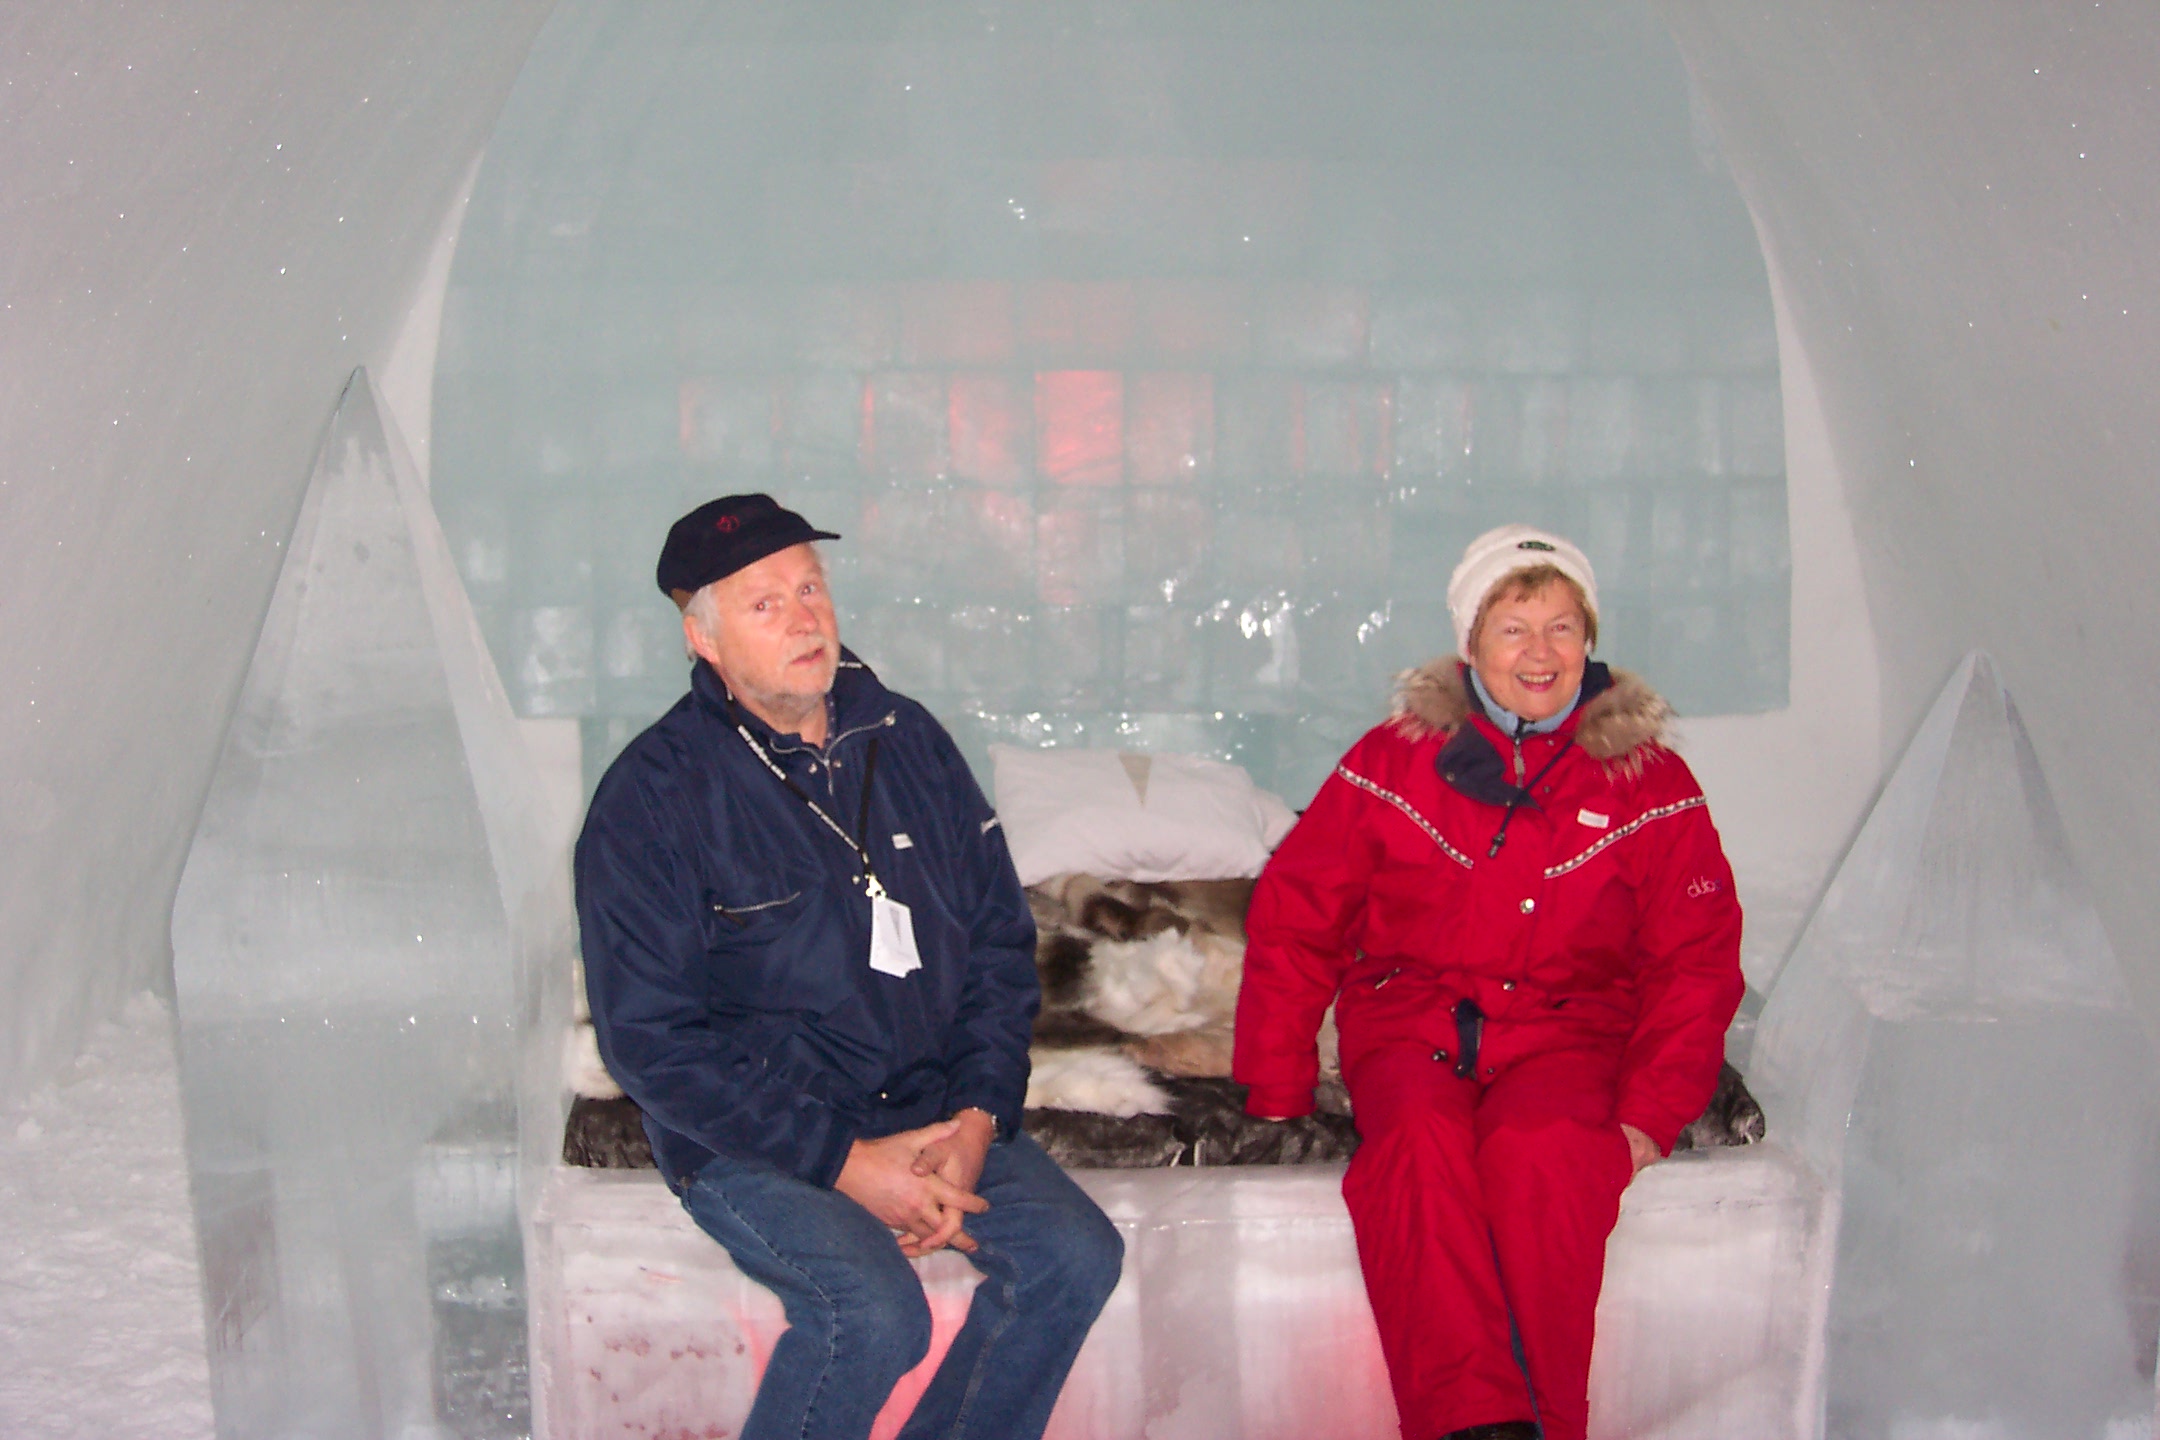 My dad and Ulla in their room at the Ice Hotel in Jukkasjrvi